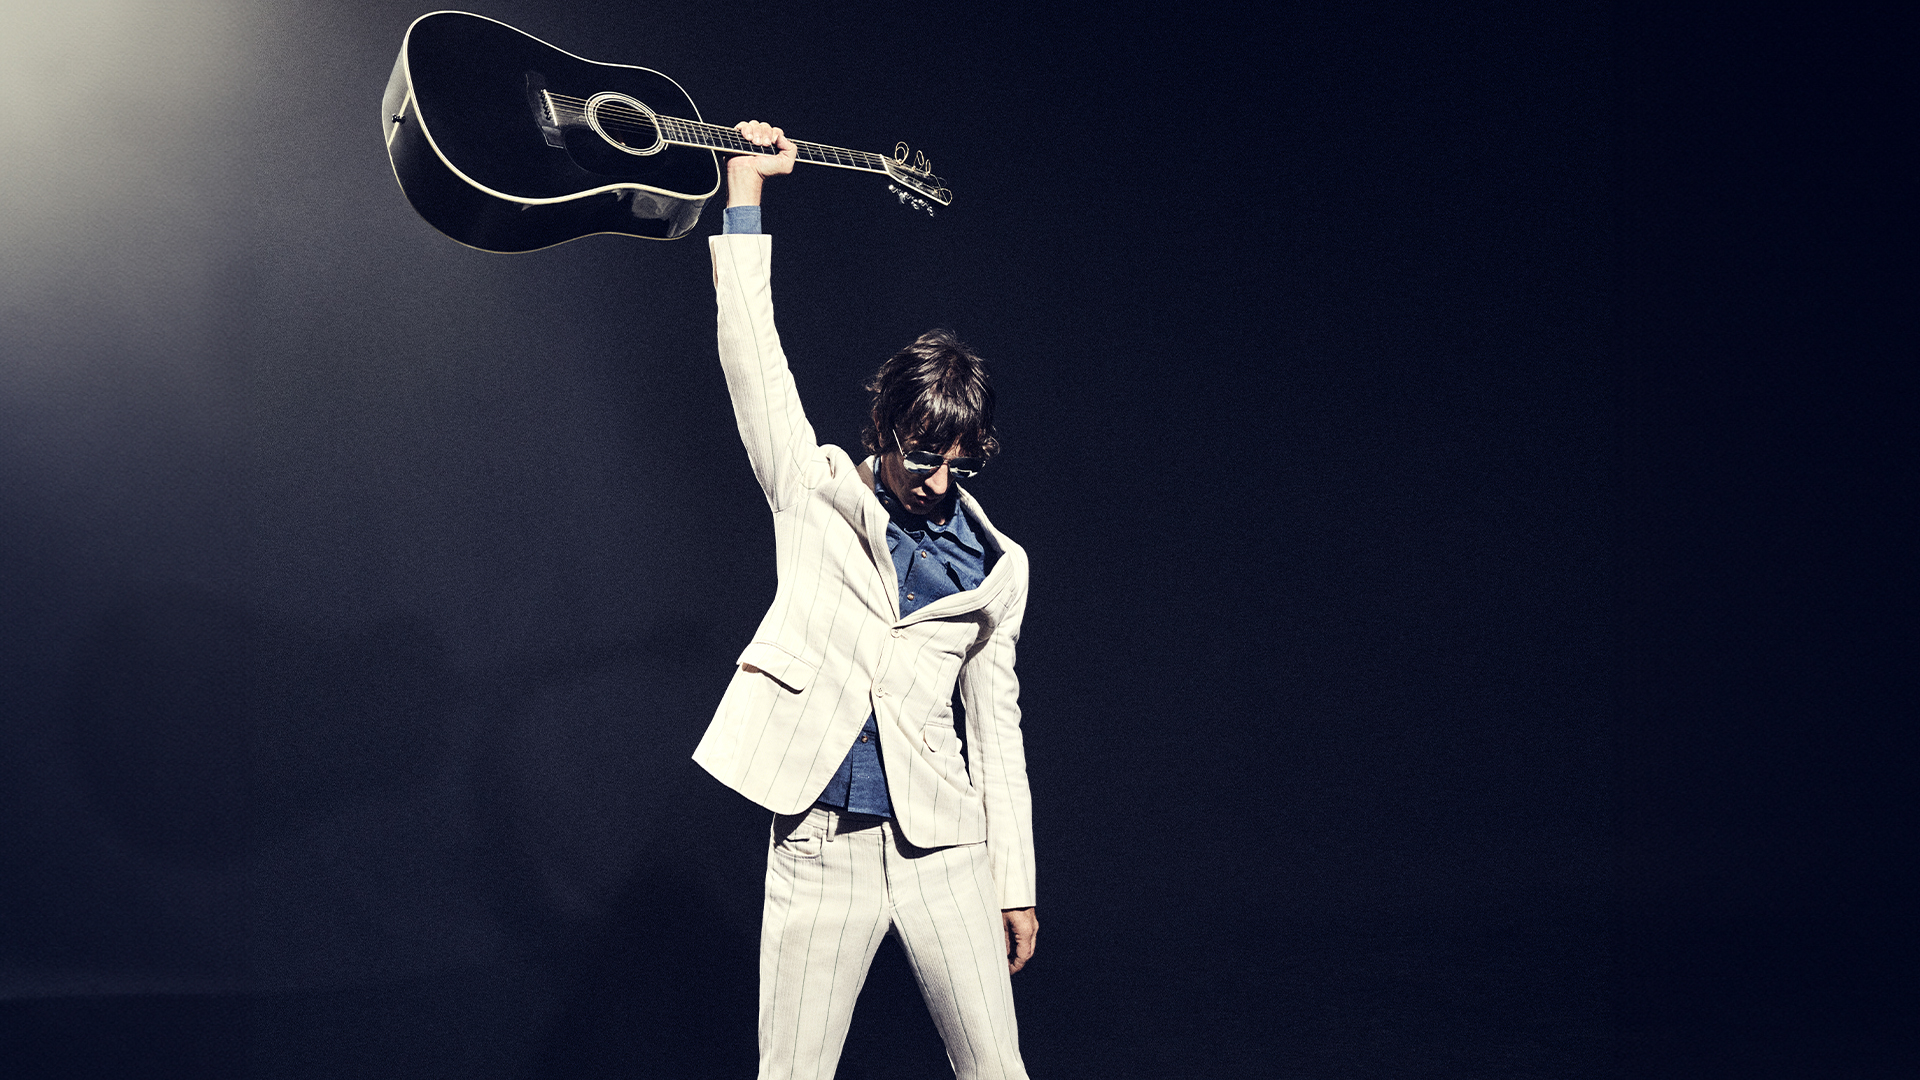 A photograph of Richard Ashcroft holding up a guitar.